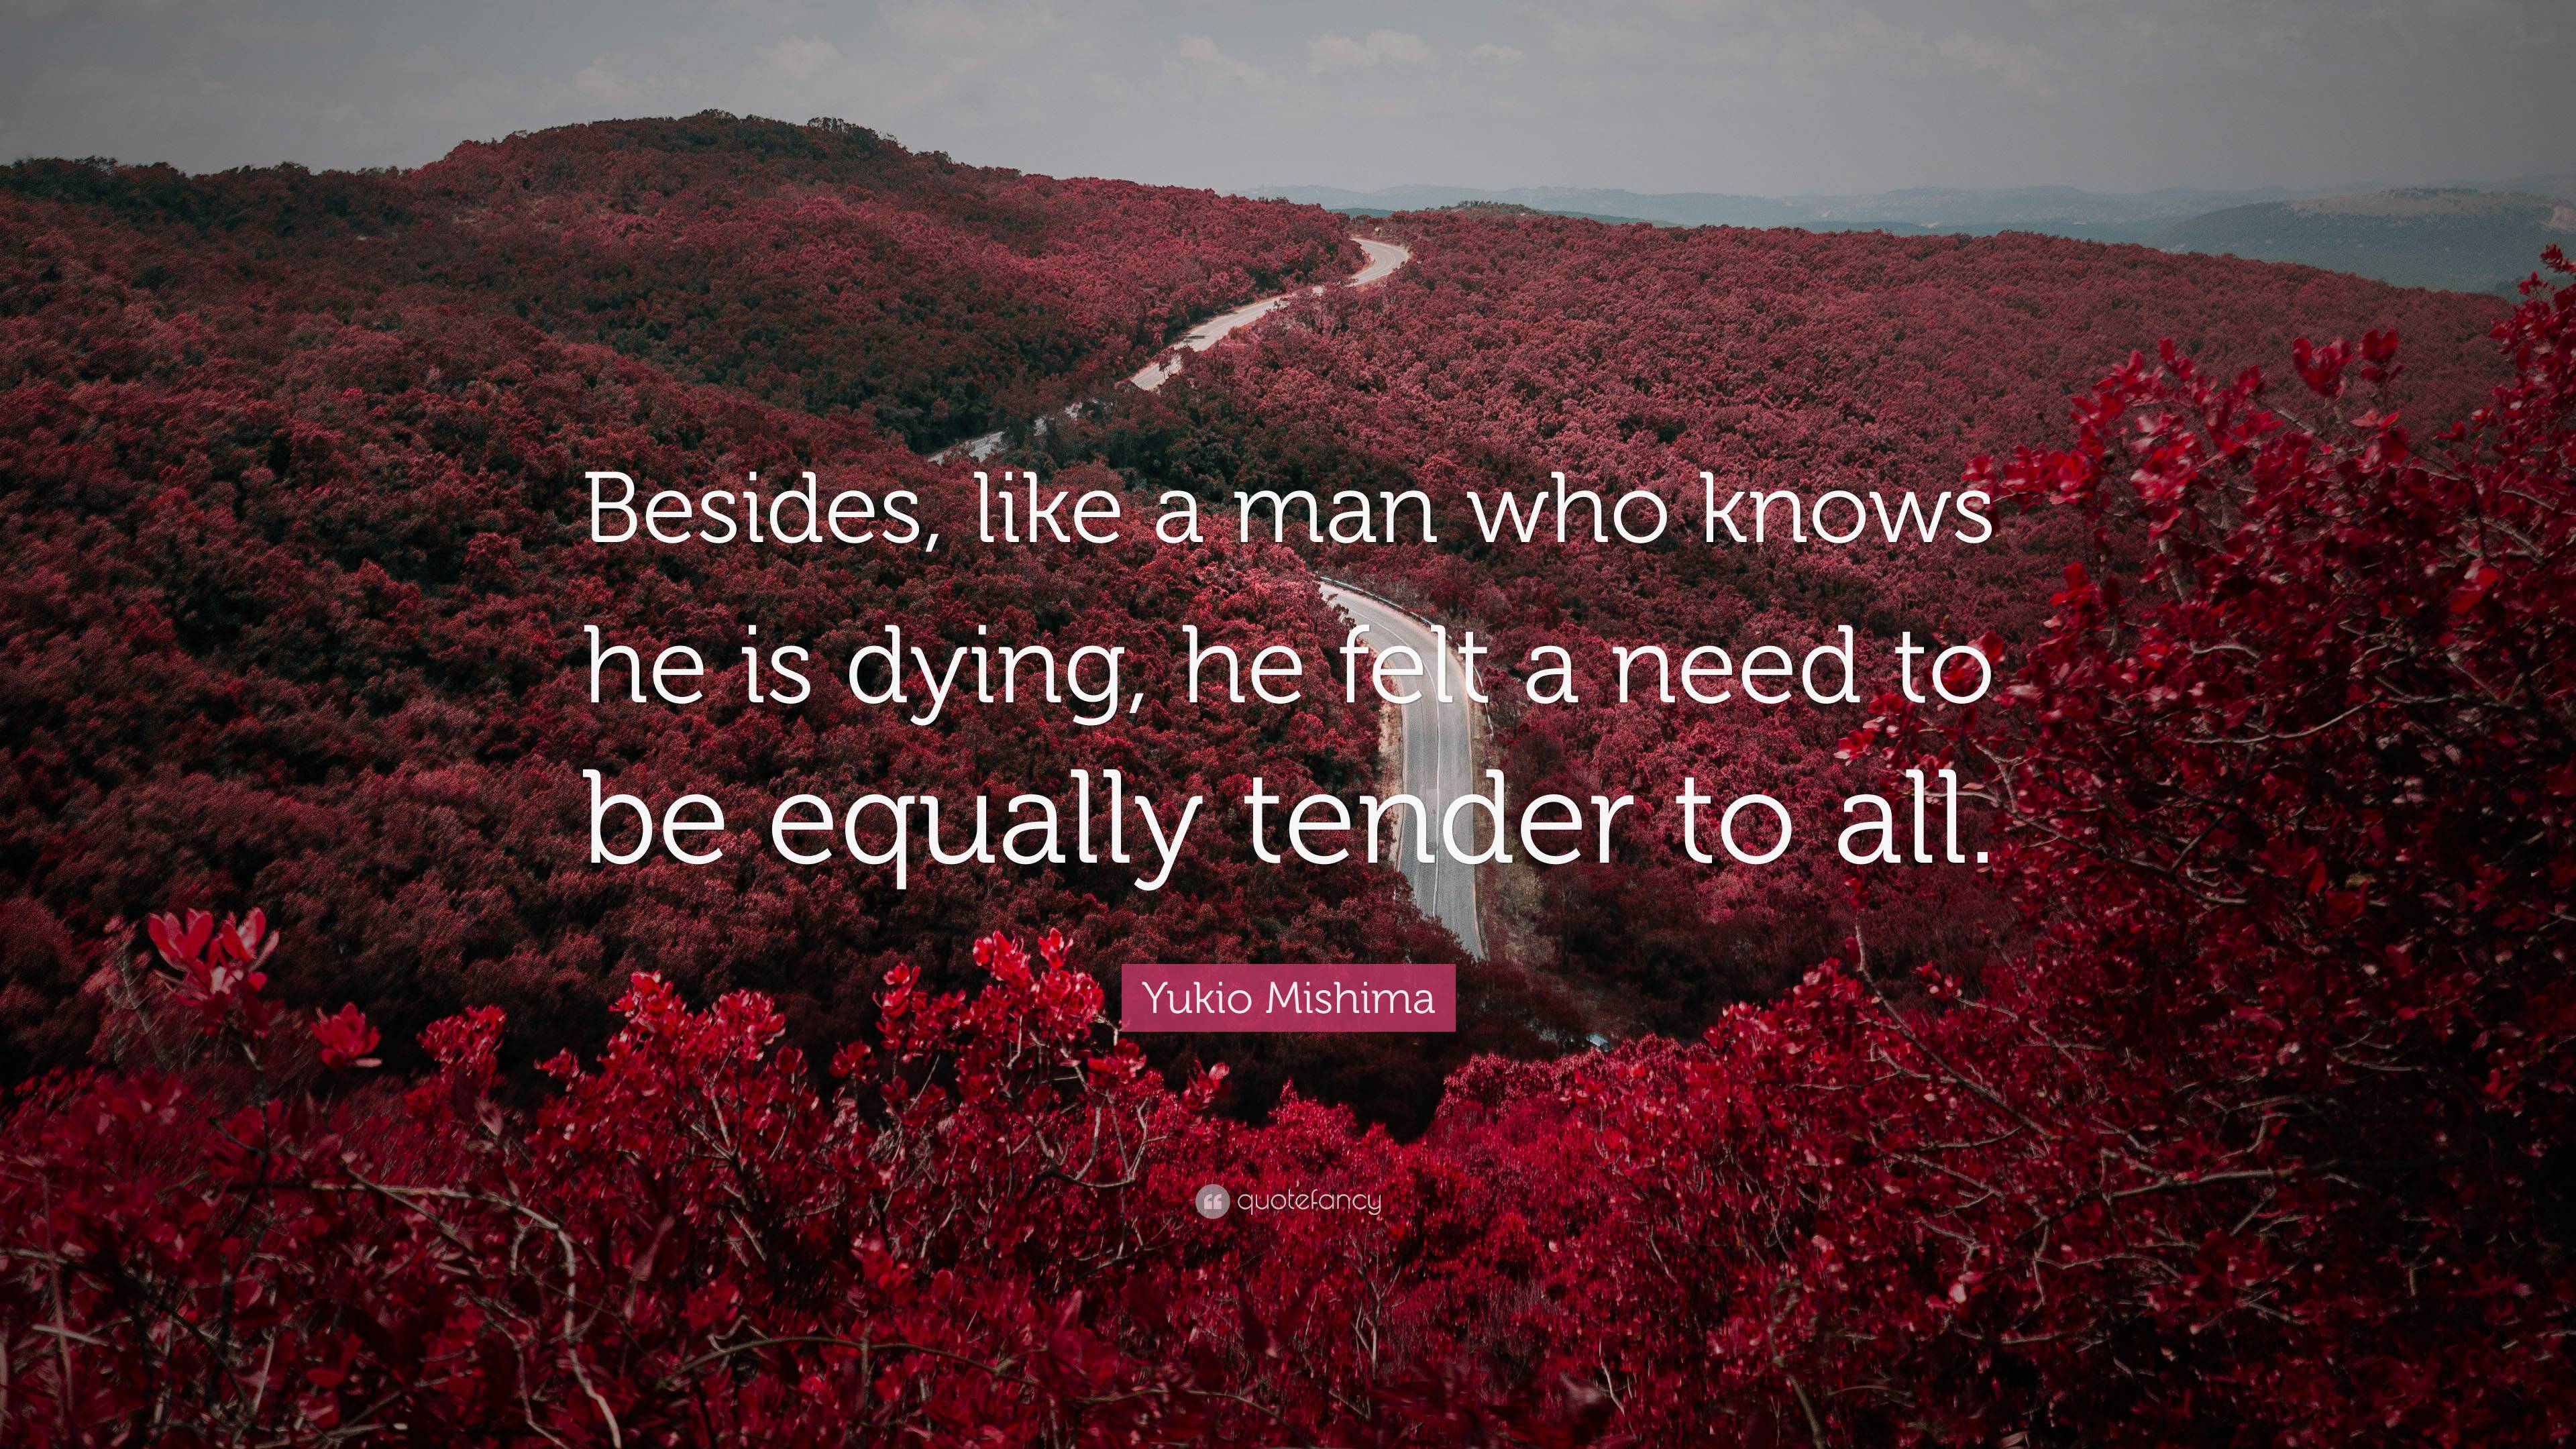 Yukio Mishima Quote: “Besides, like a man who knows he is dying, he ...